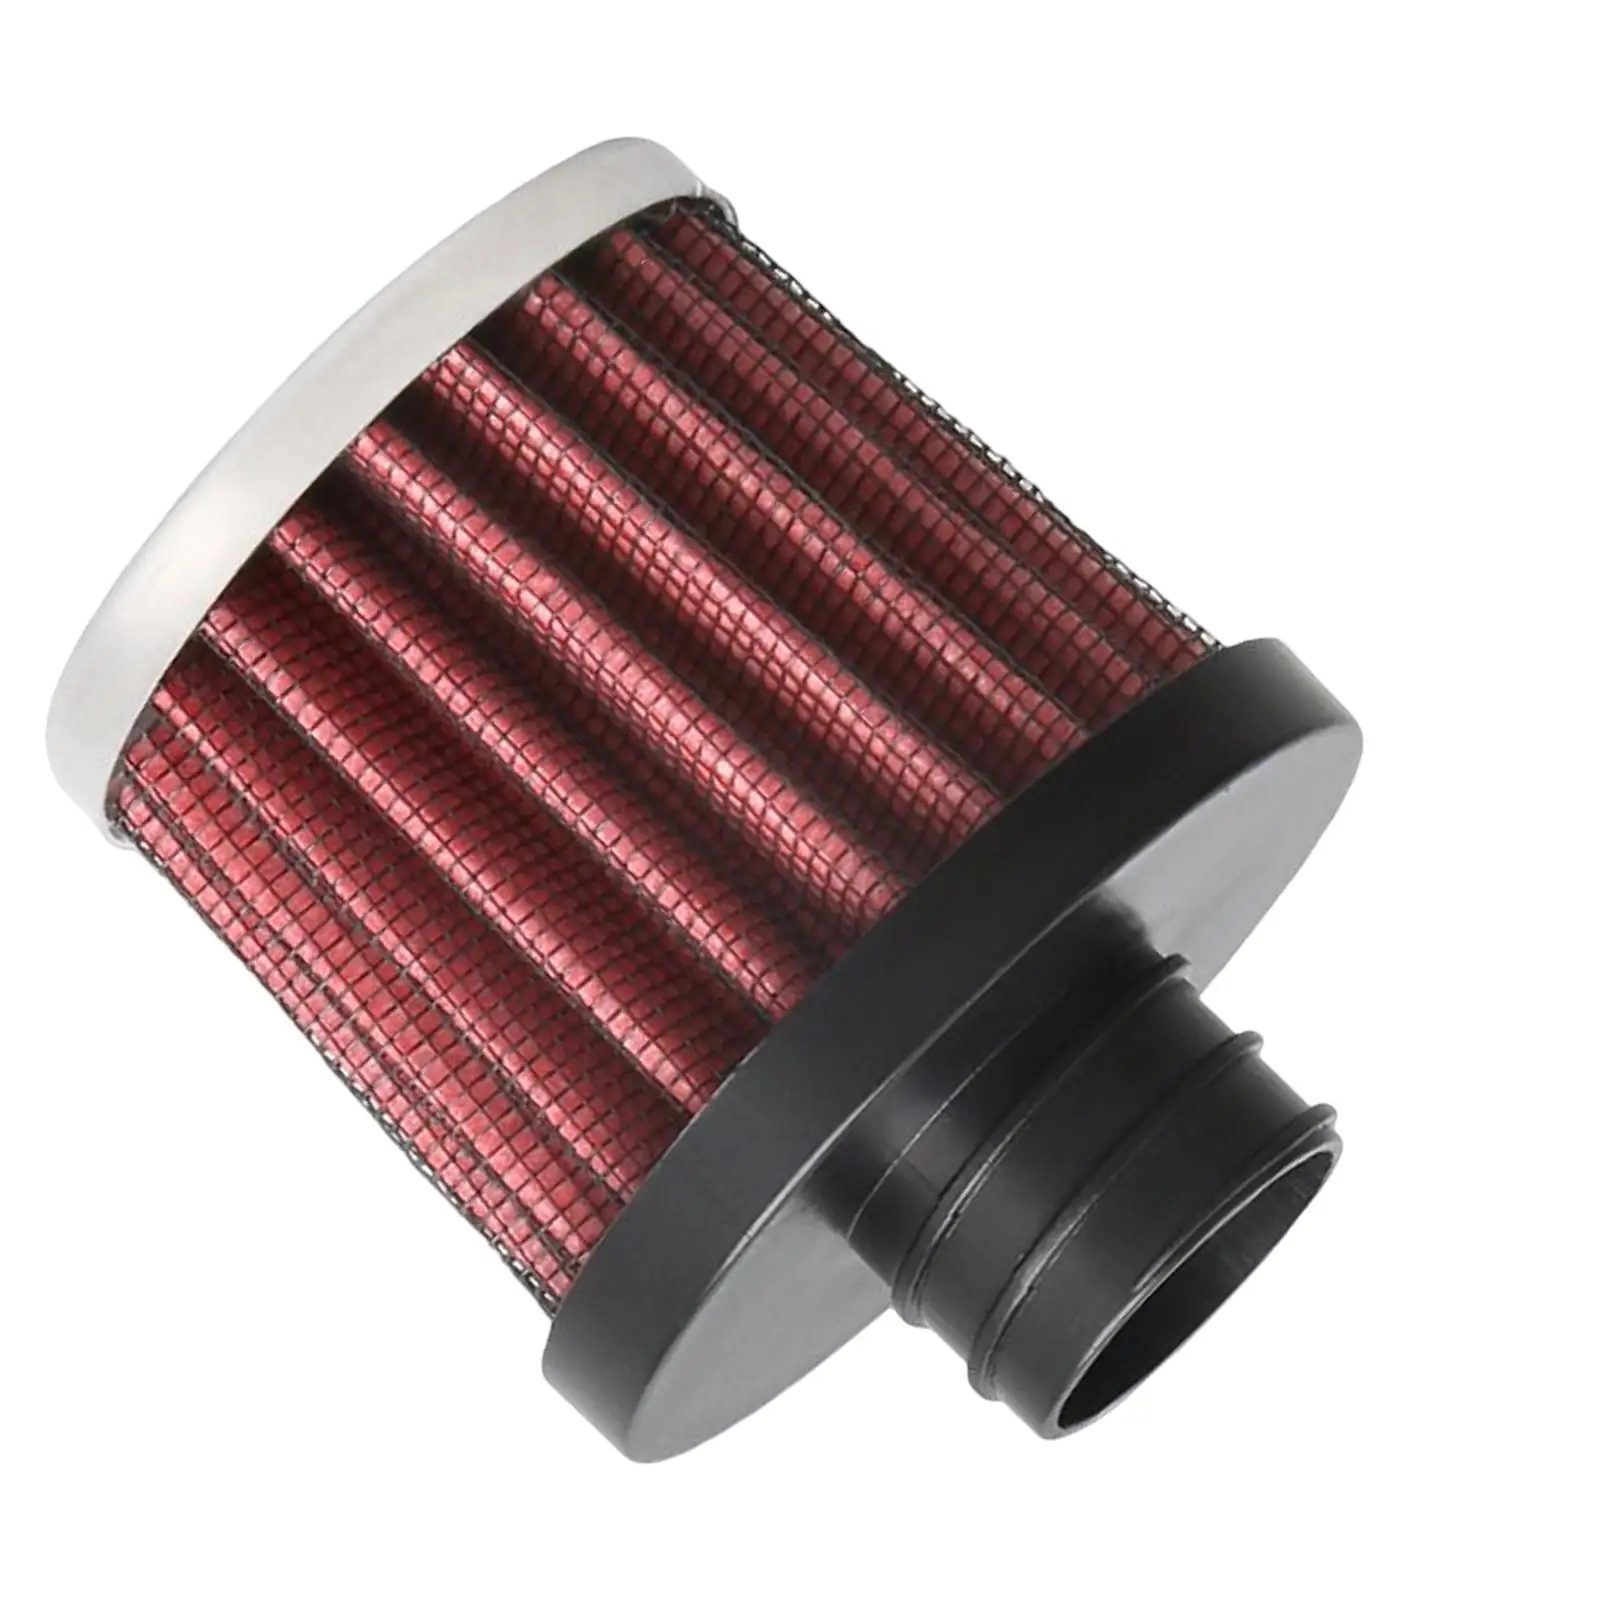 25mm Parking heating Air Filter Heaters Accessories Universal for Parking heating Replaces Durable